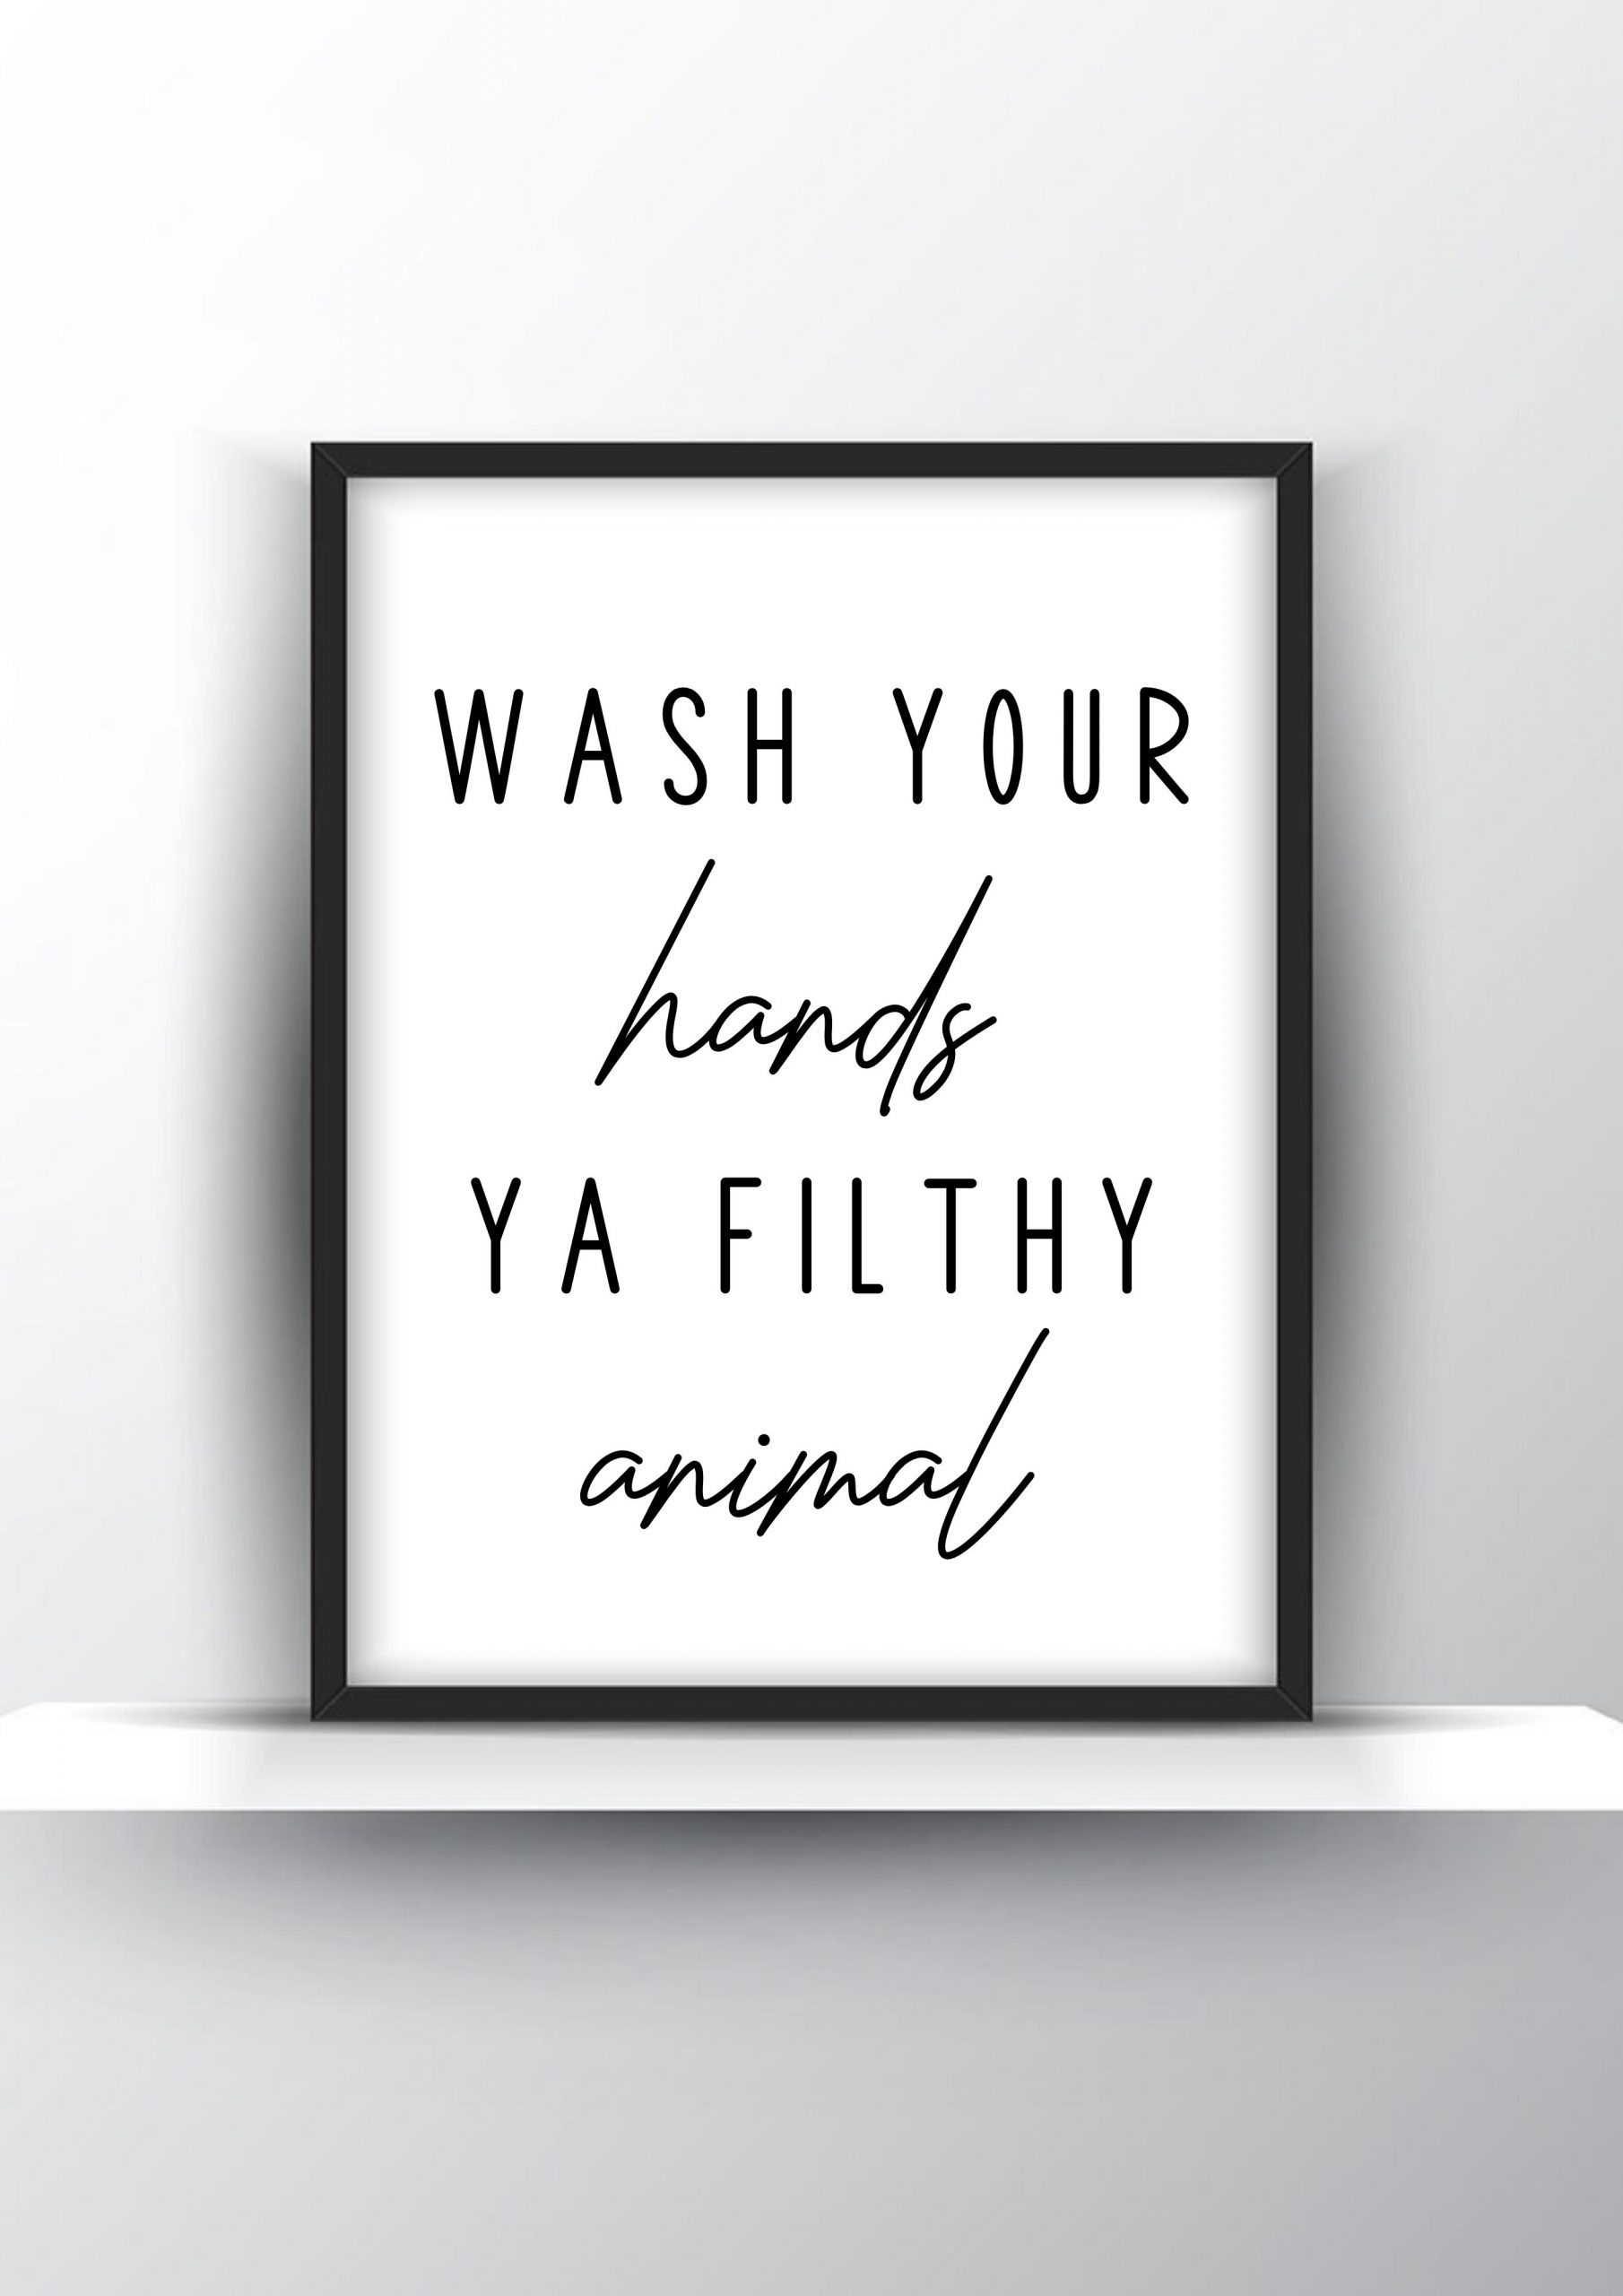 Wash your hands ya filthy animal Unframed and Framed Wall Art Poster Print